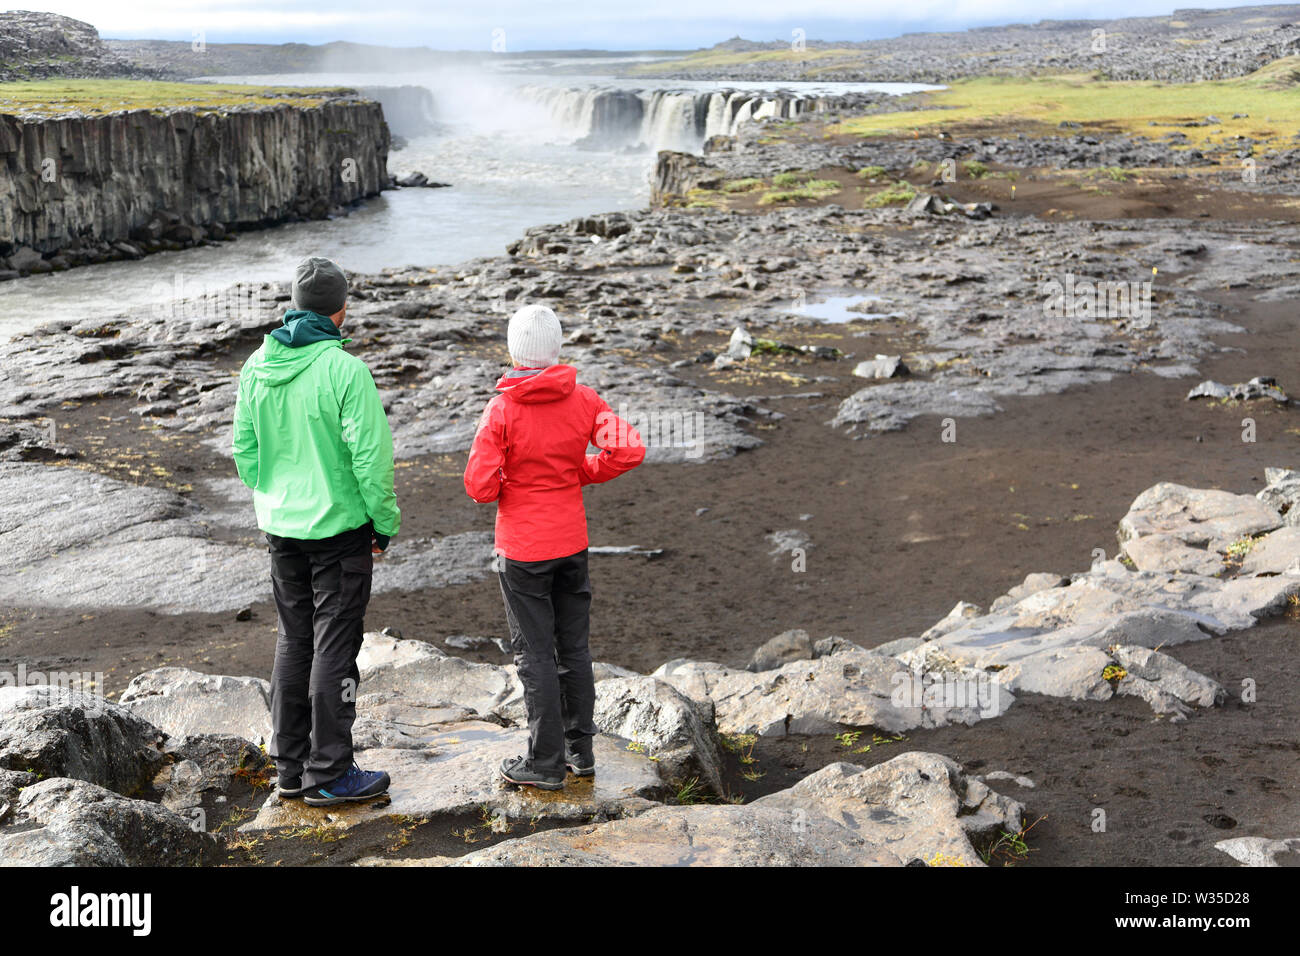 Iceland nature landscape with people by Selfoss waterfall. Hikers enjoying view of famous Icelandic tourist attraction destination. Hiking couple taking break by Selfoss in Vatnajokull national park. Stock Photo